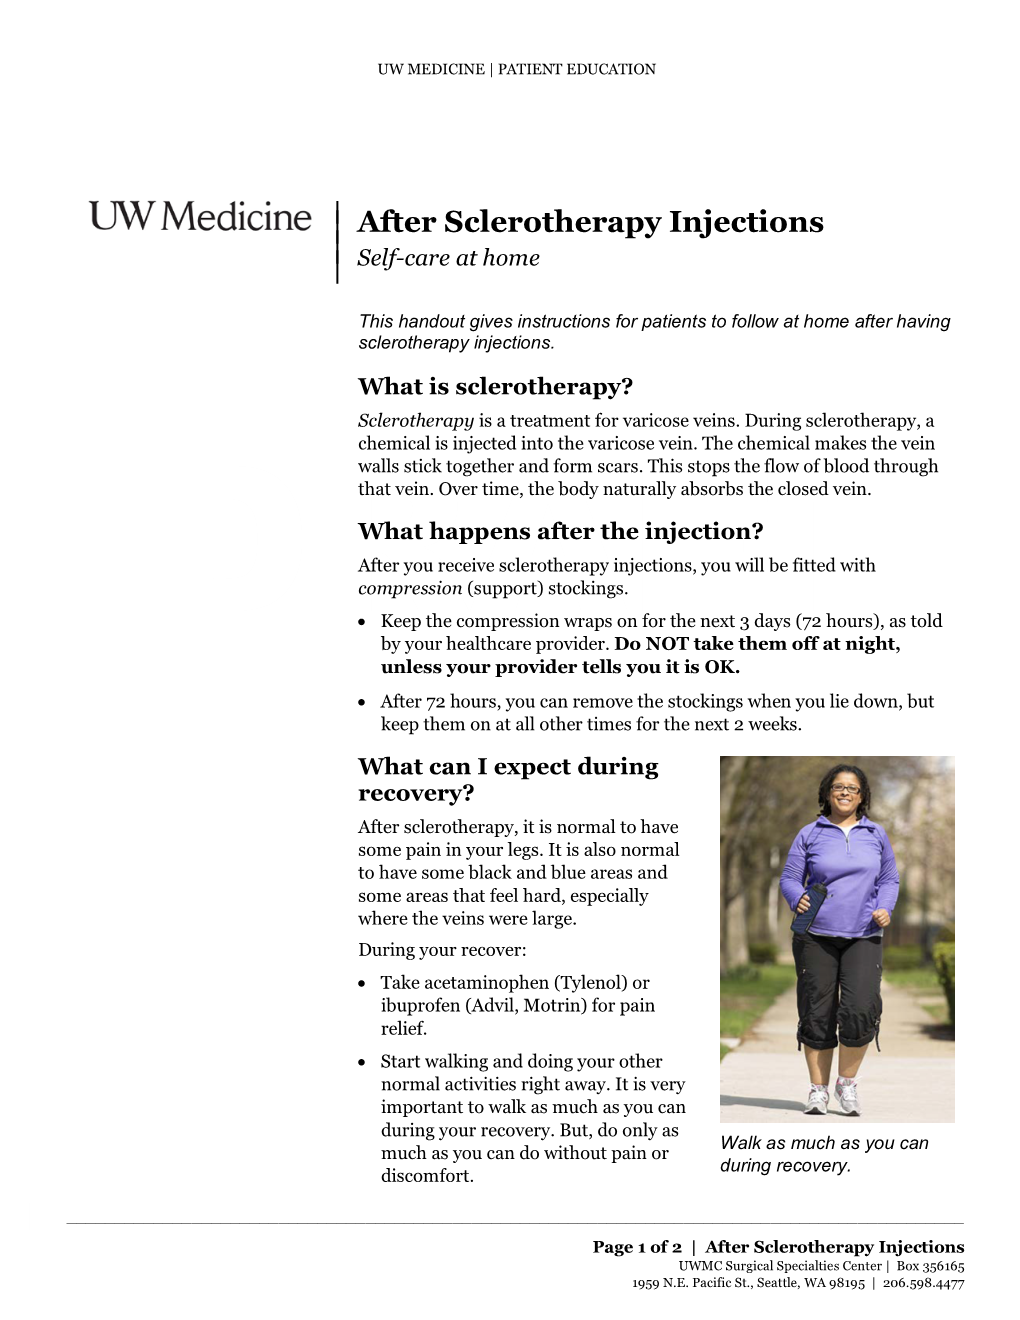 After Sclerotherapy Injections | | Self-Care at Home